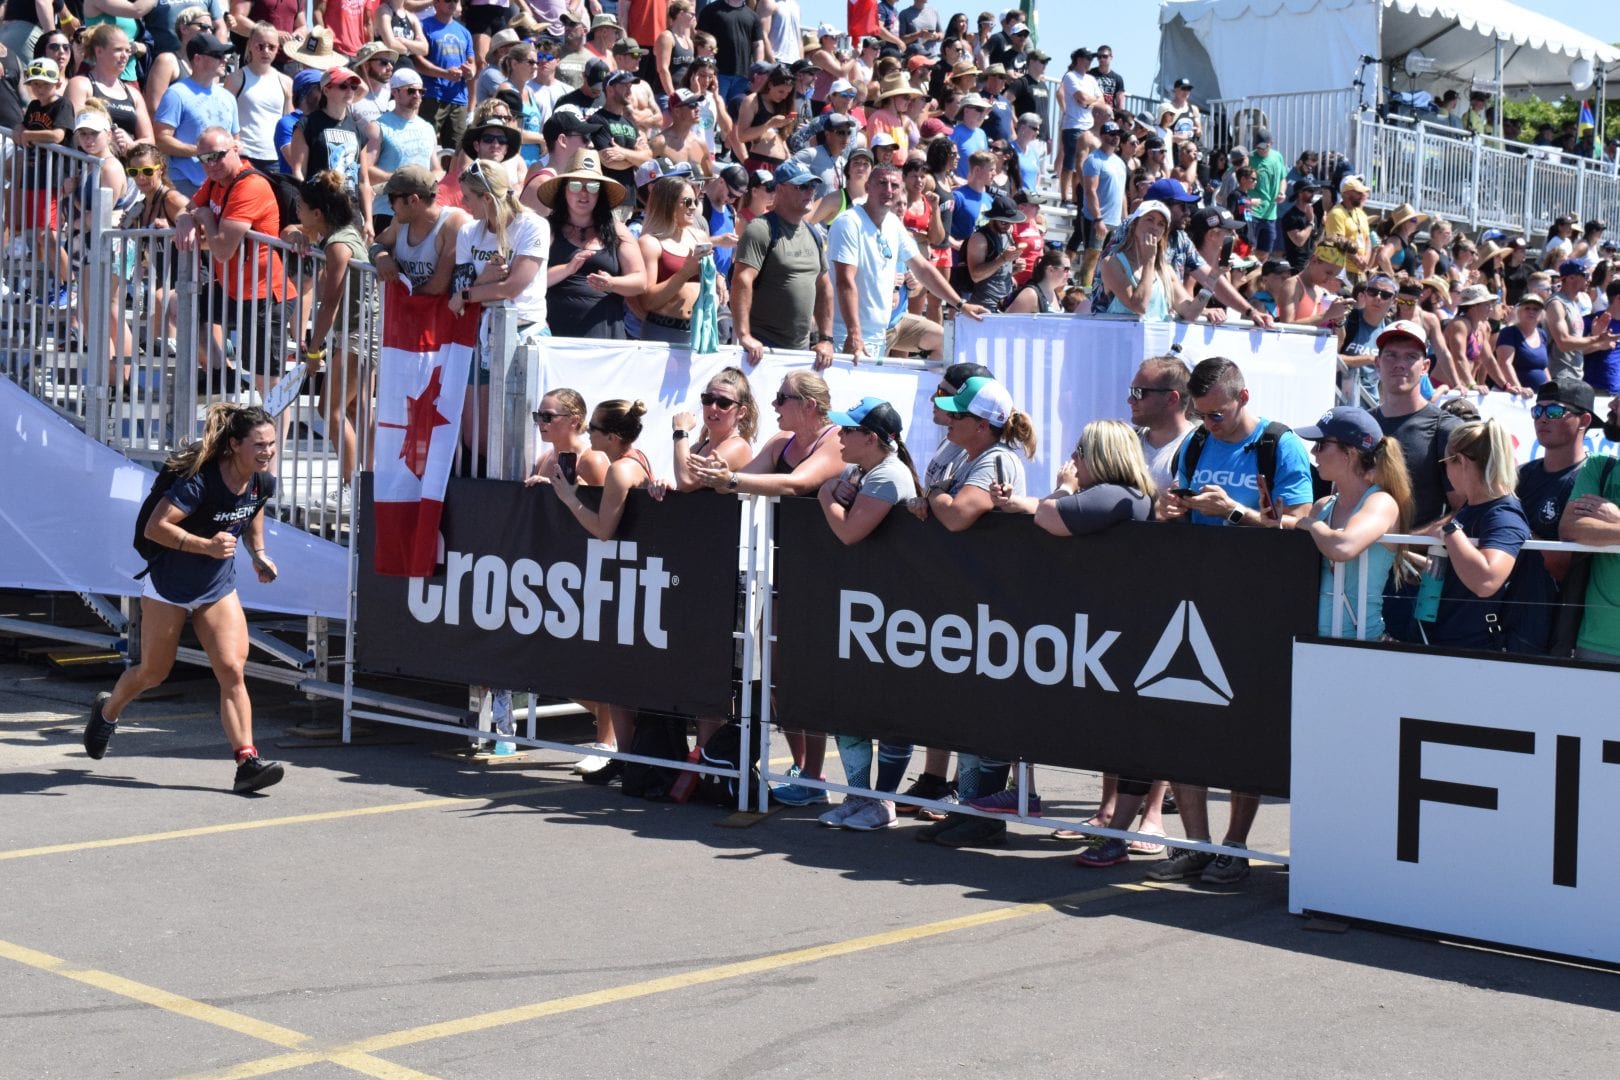 Jamie Greene of CrossFit Yas completes the Ruck Run event at the 2019 CrossFit Games